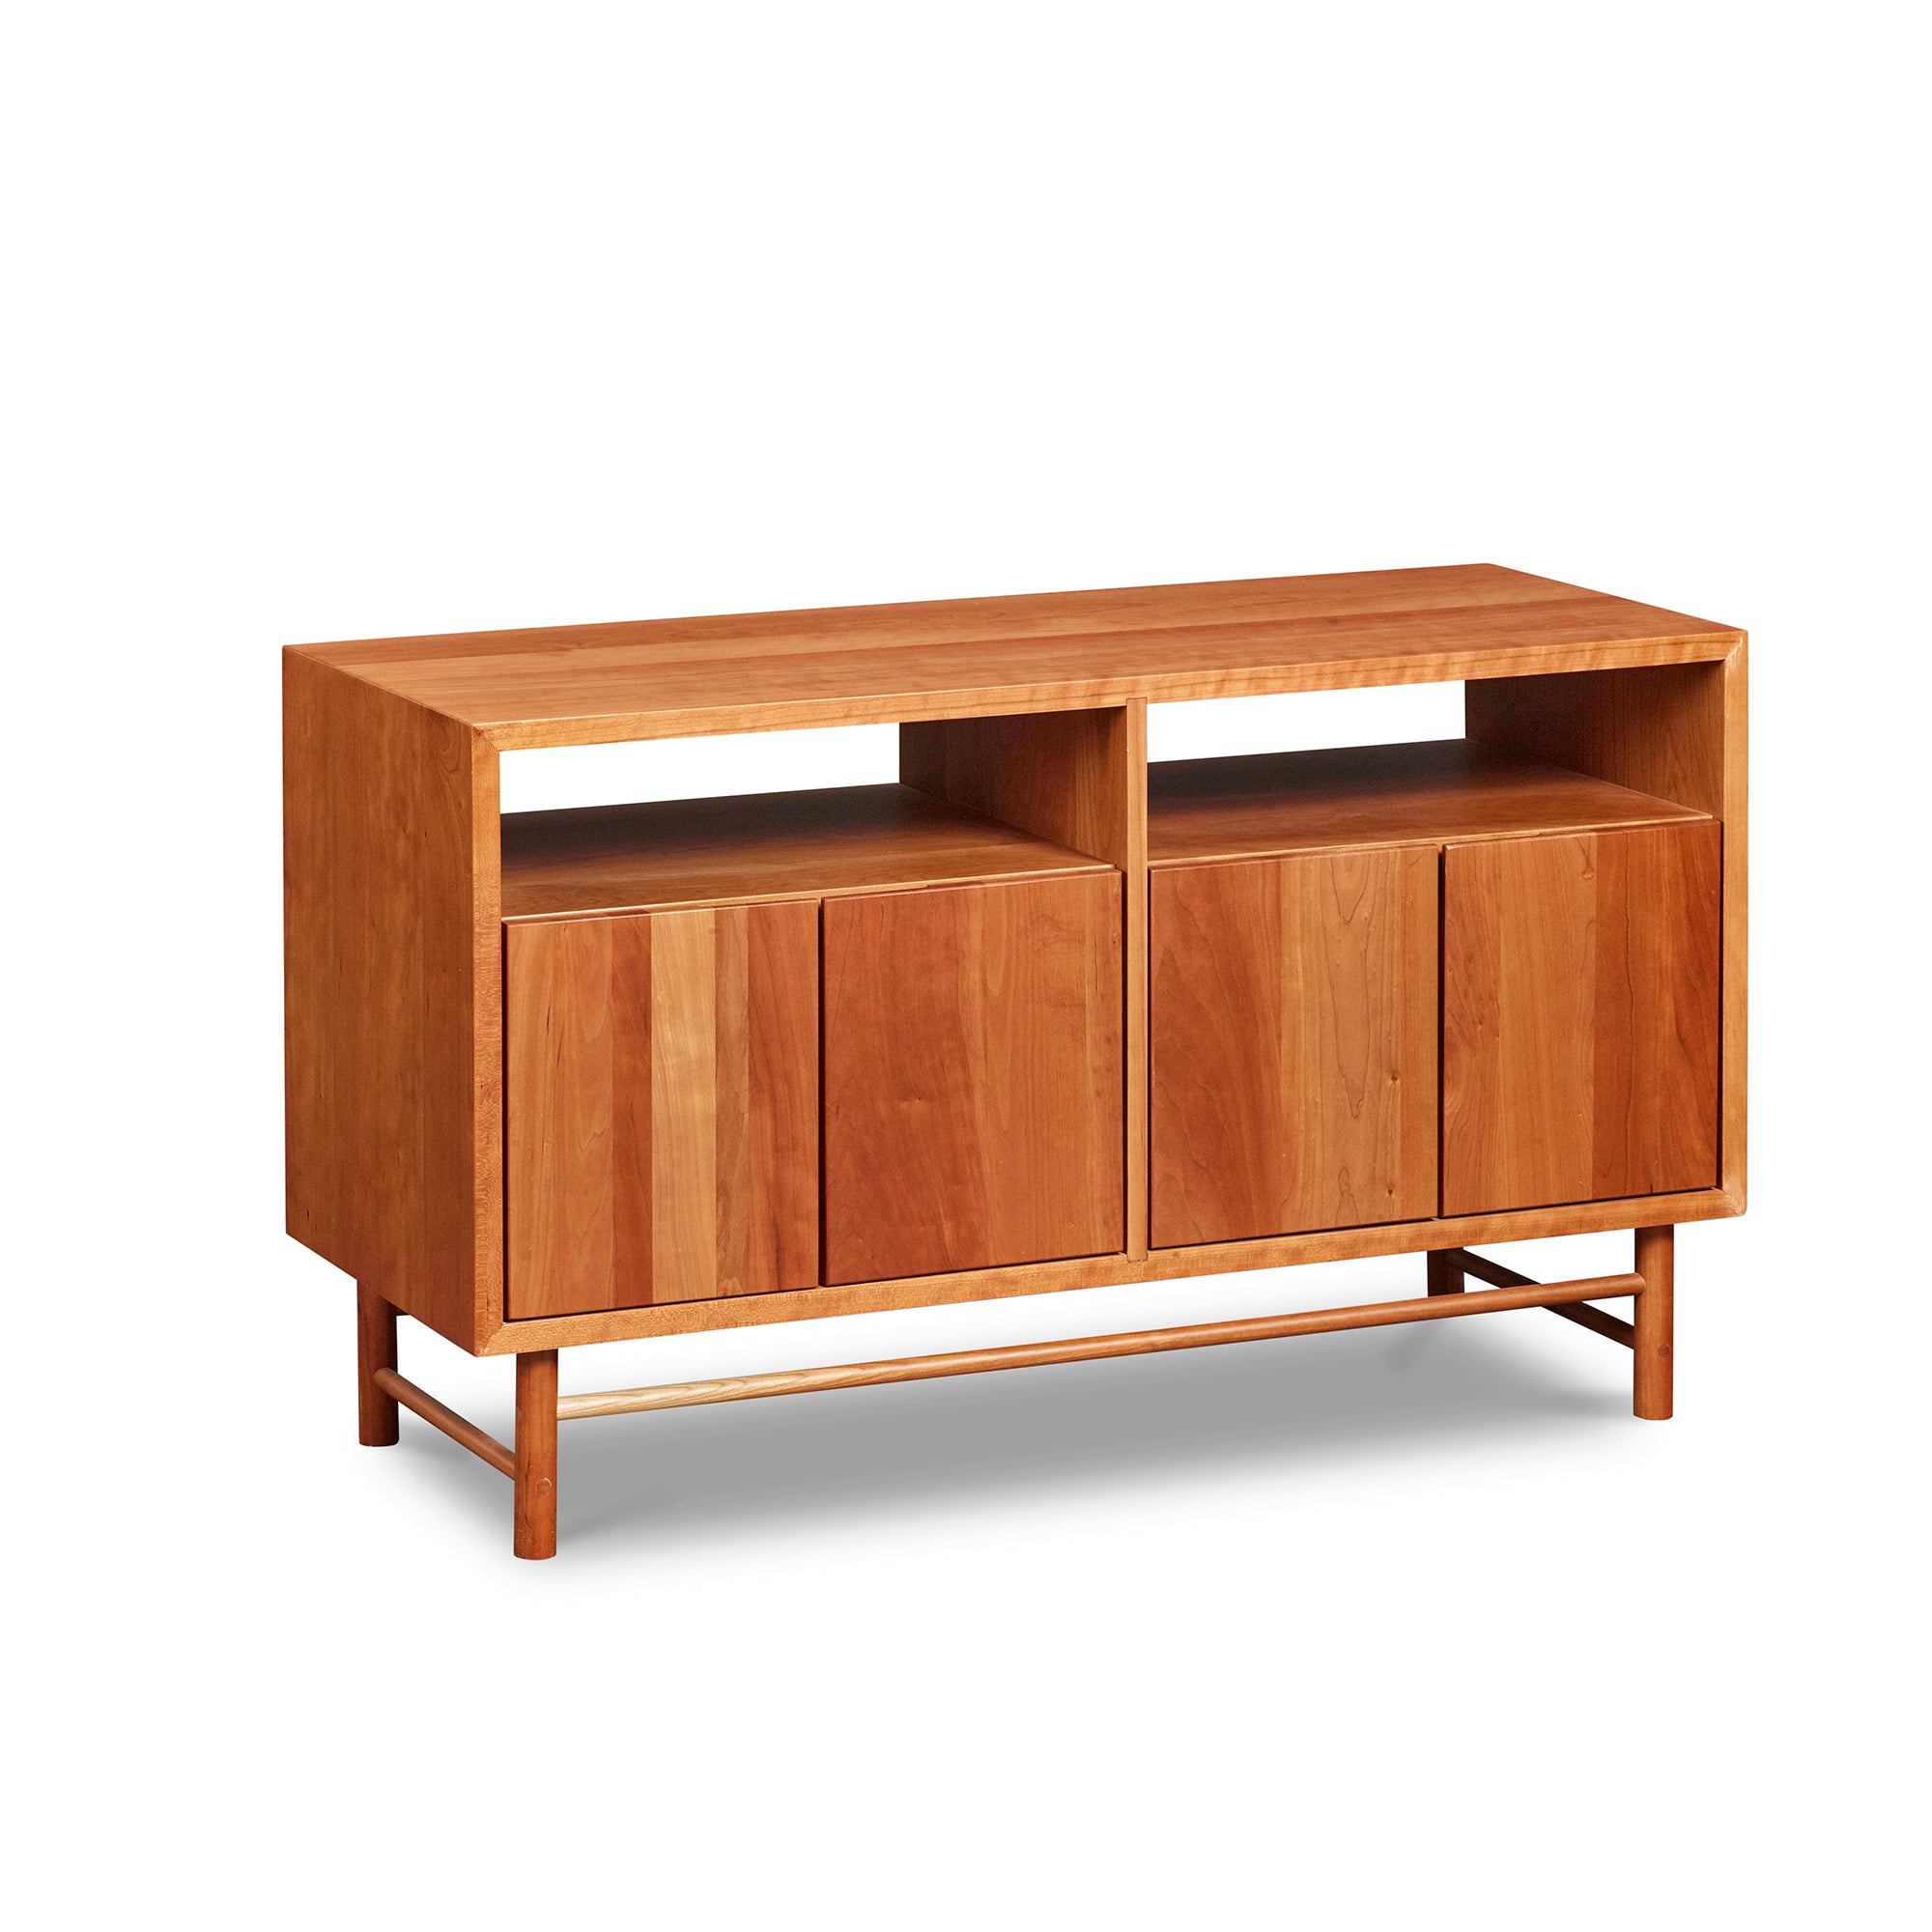 Mid-century modern Navarend media case in solid cherry wood with round legs and stretchers and four doors with storage space